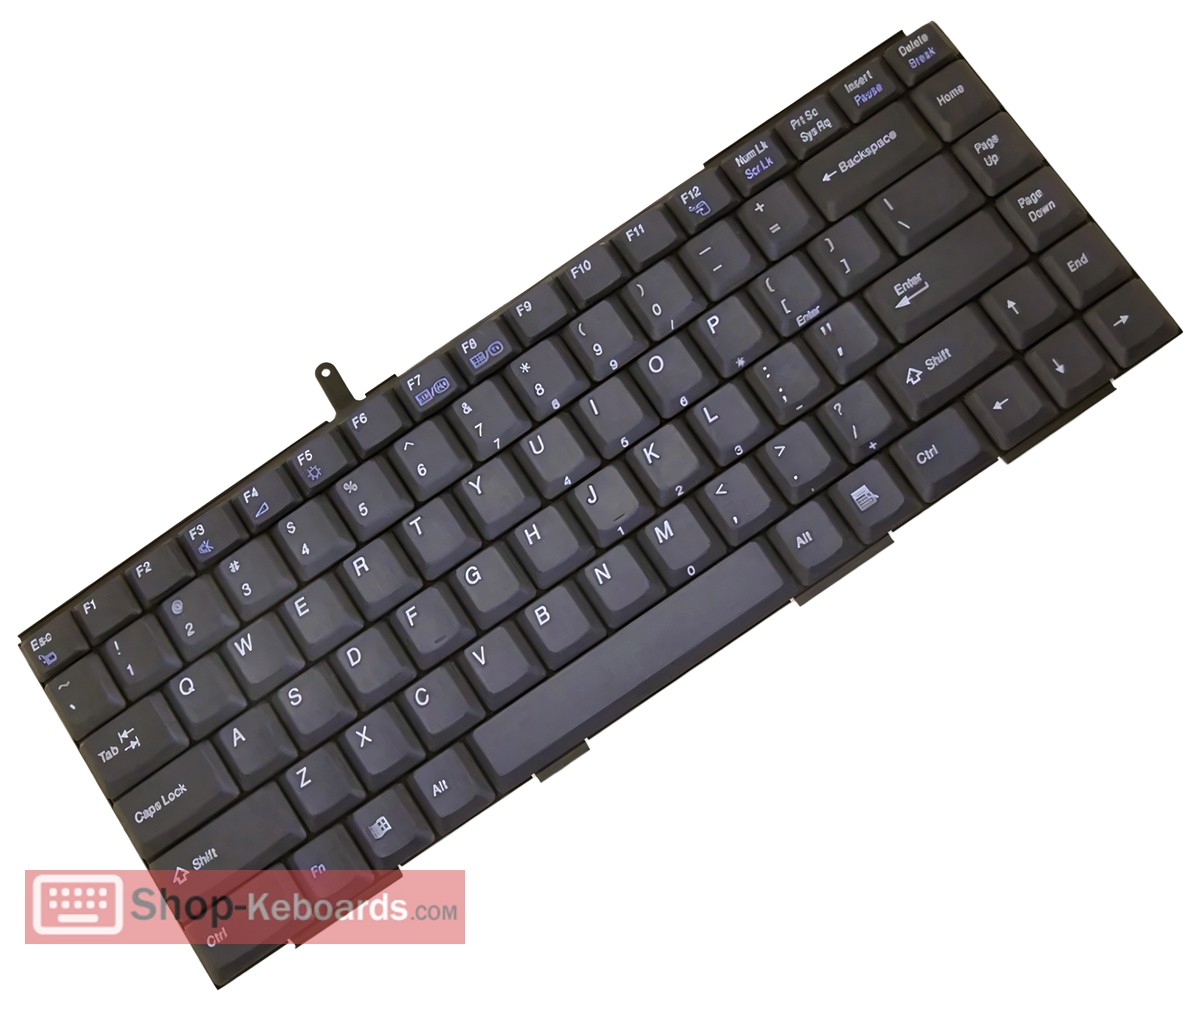 Sony VAIO PCG-F480 Keyboard replacement